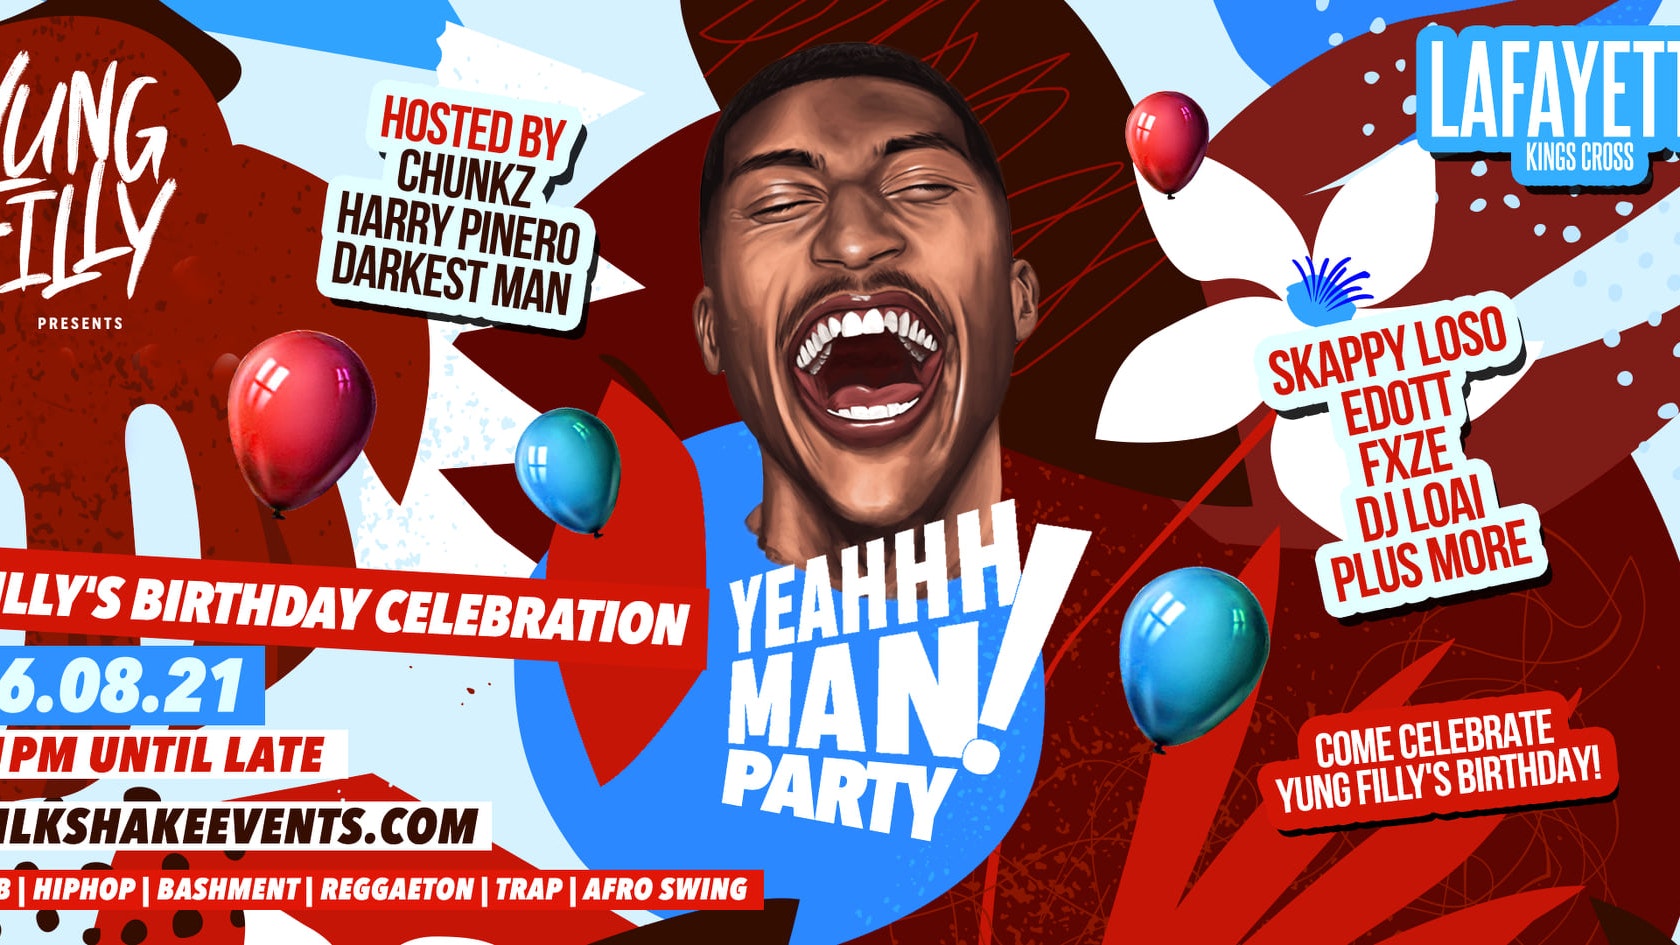 SOLD OUT —  Yung Filly Presents: The YEAHHH MAN Party ‘FILLYS BIRTHDAY’ | ft. Chunkz, Harry Pinero, Skapps & Special Guests!